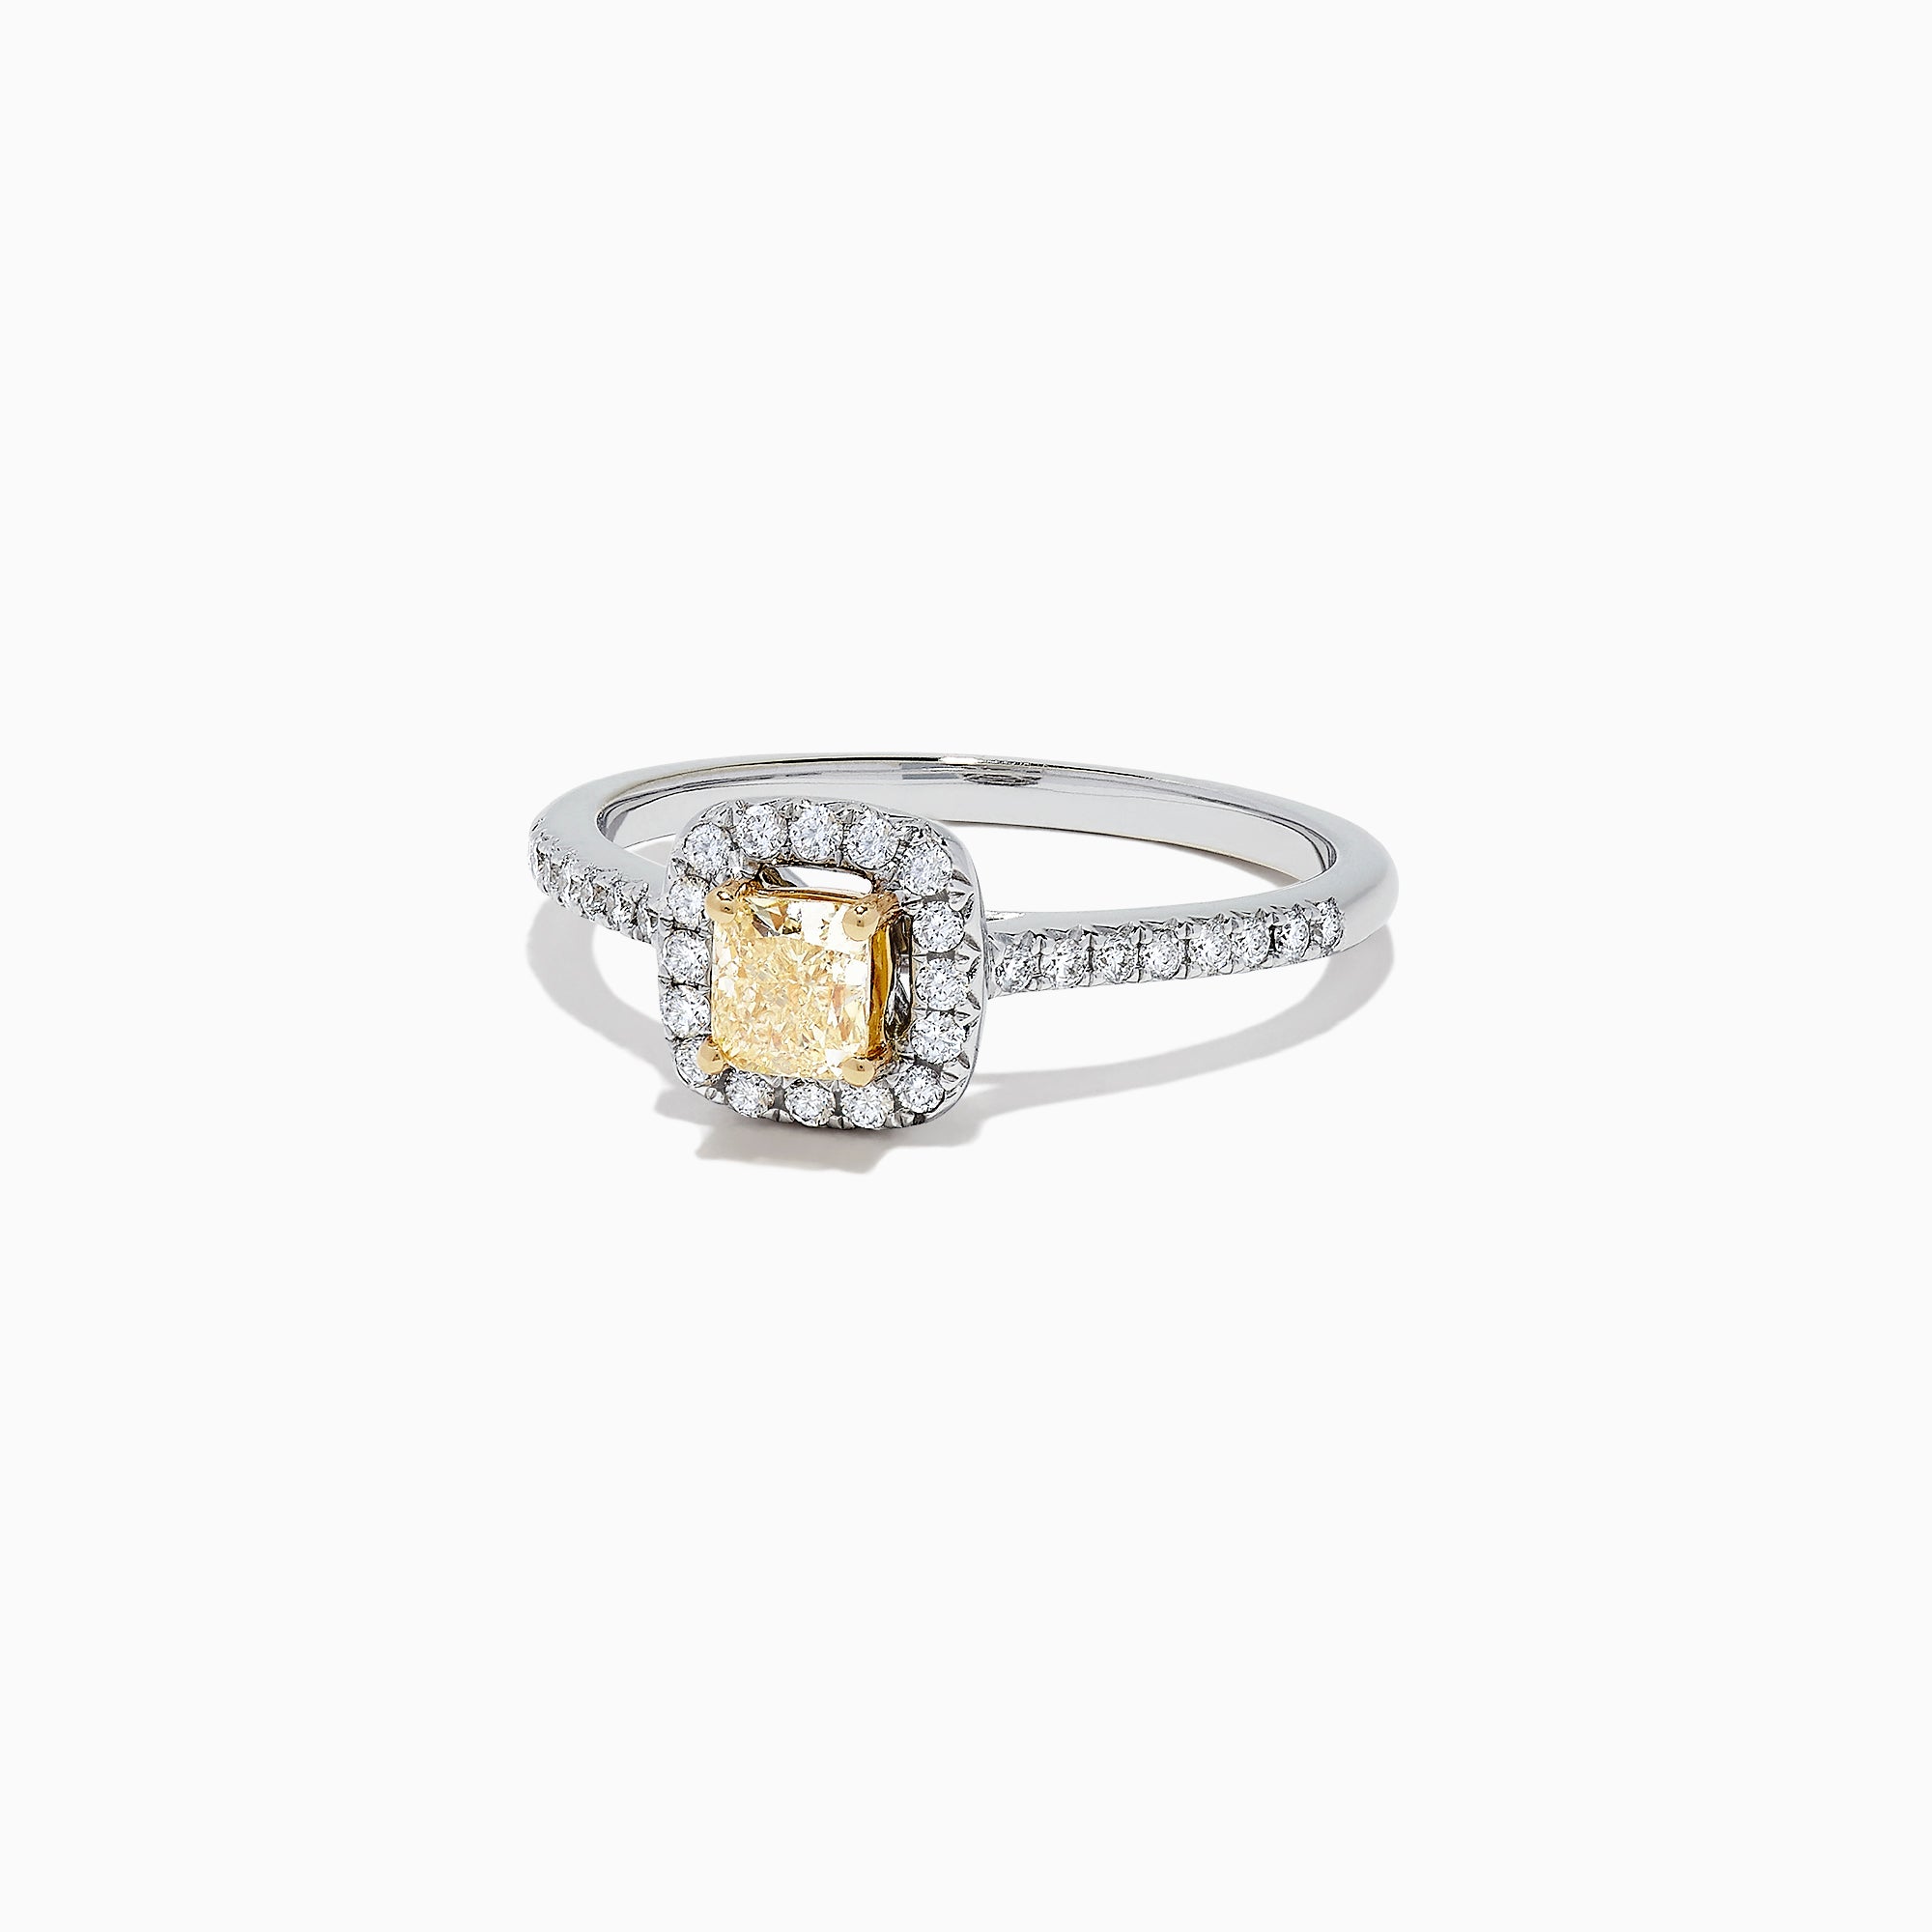 Effy Canare 18K Two-Tone Gold Yellow and White Diamond Ring, 0.61 TCW